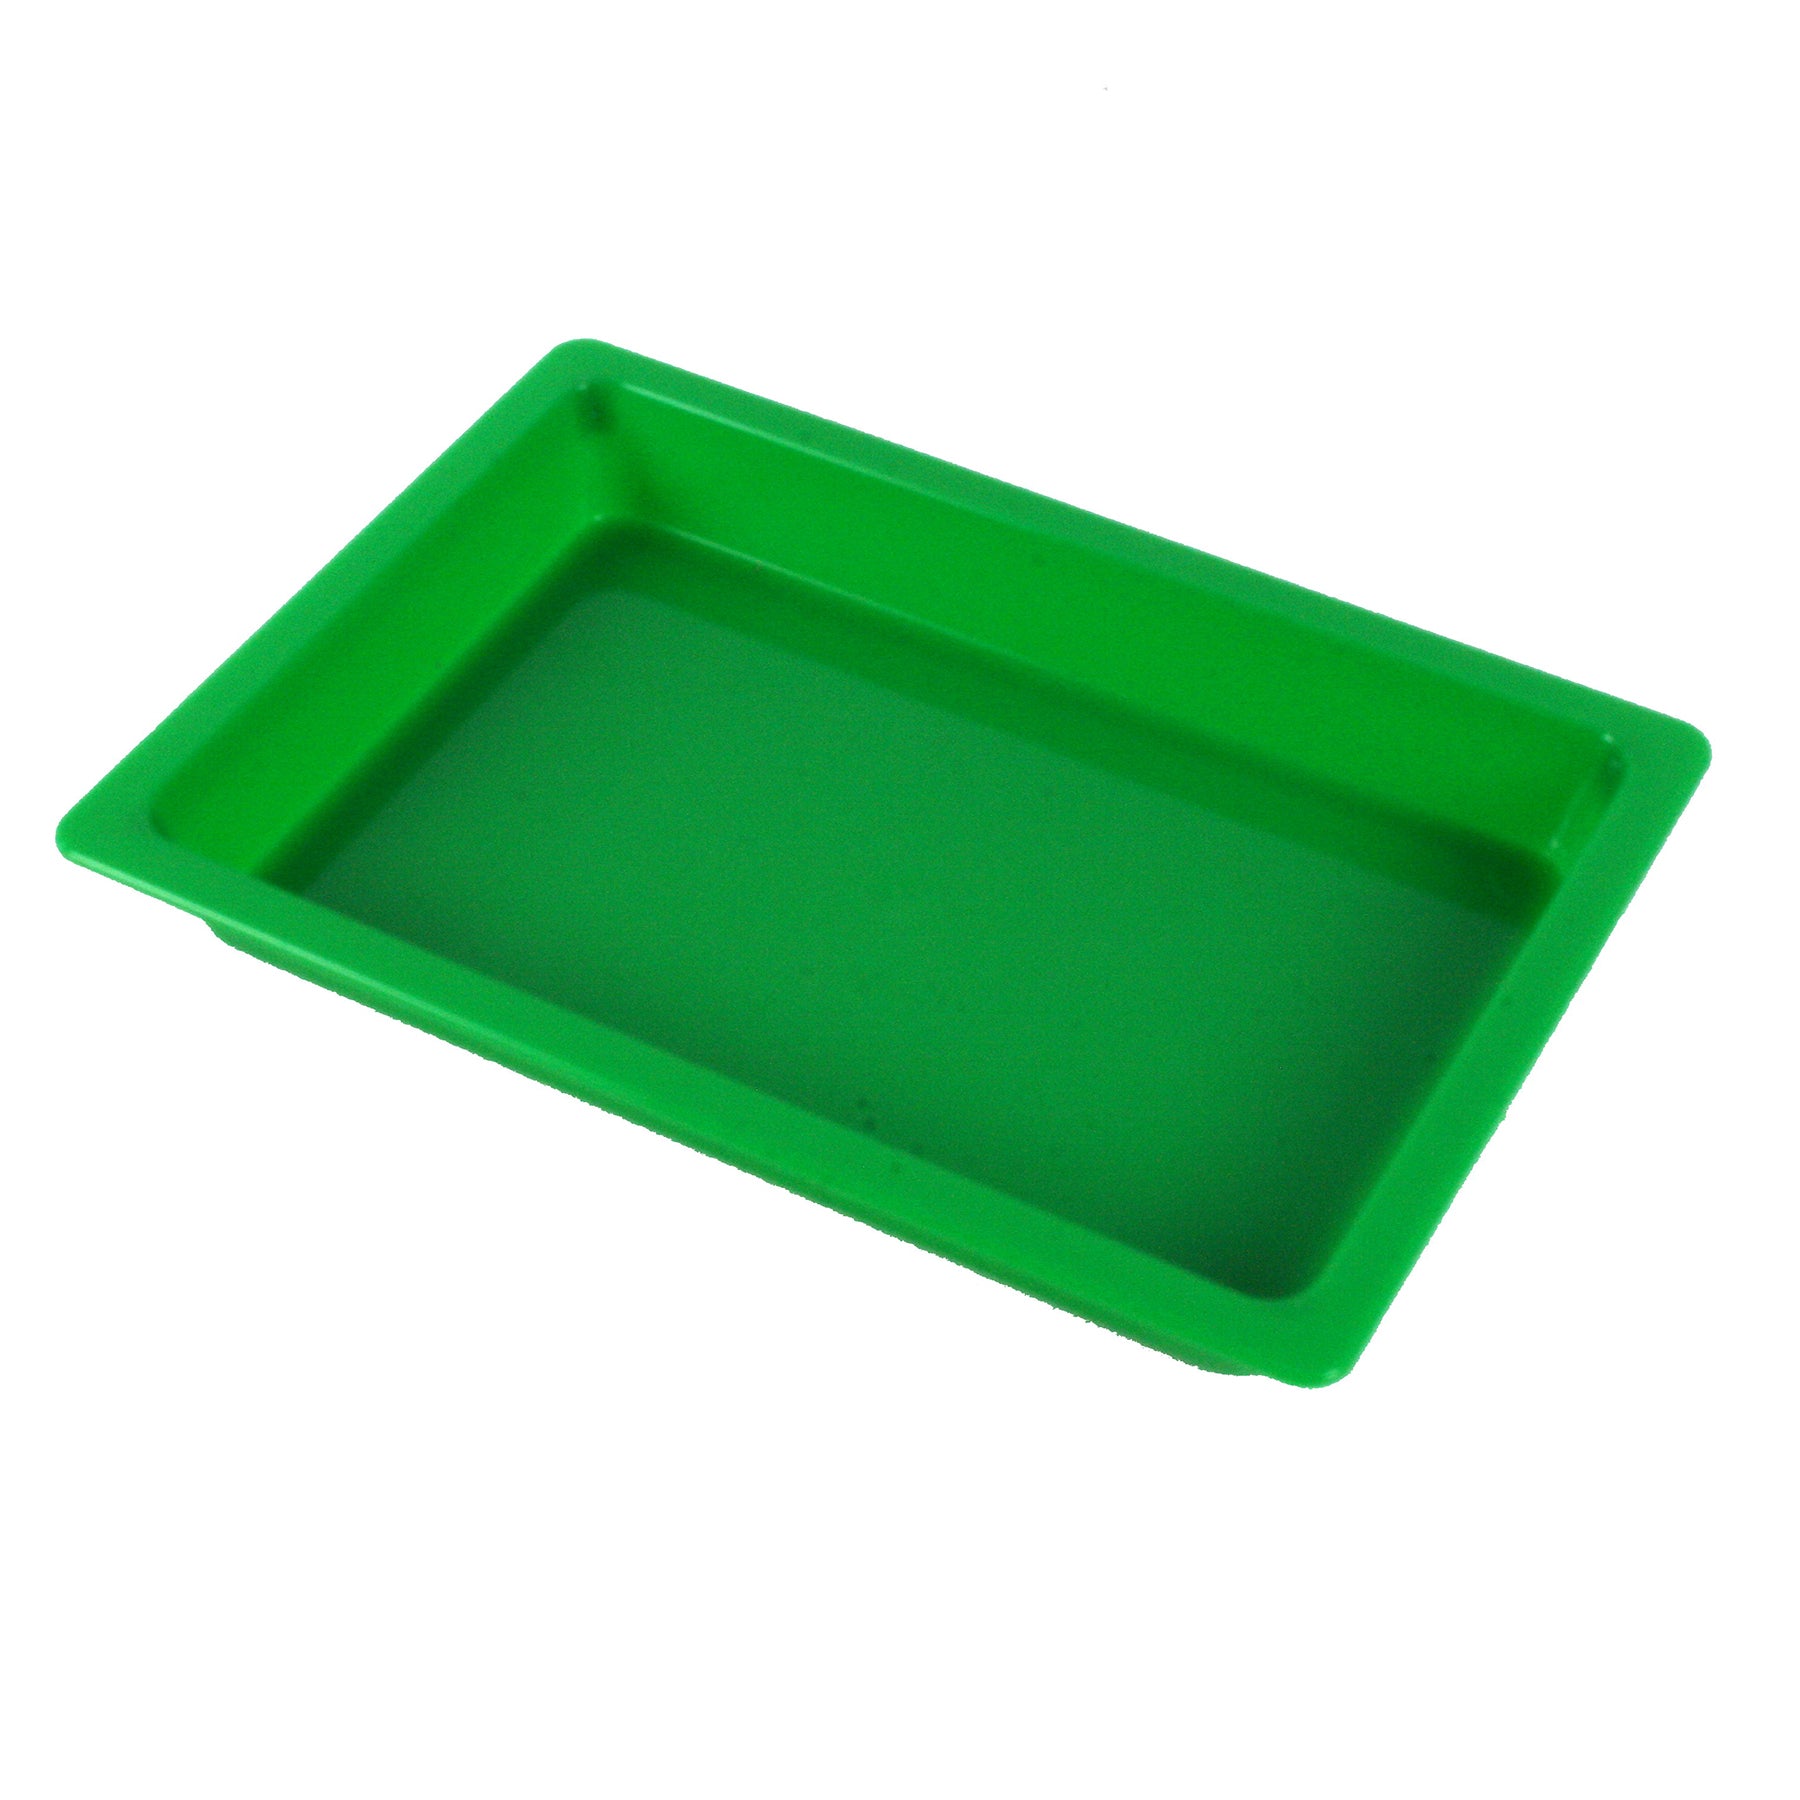 Small Creativitray®, Green, Pack of 6 - A1 School Supplies